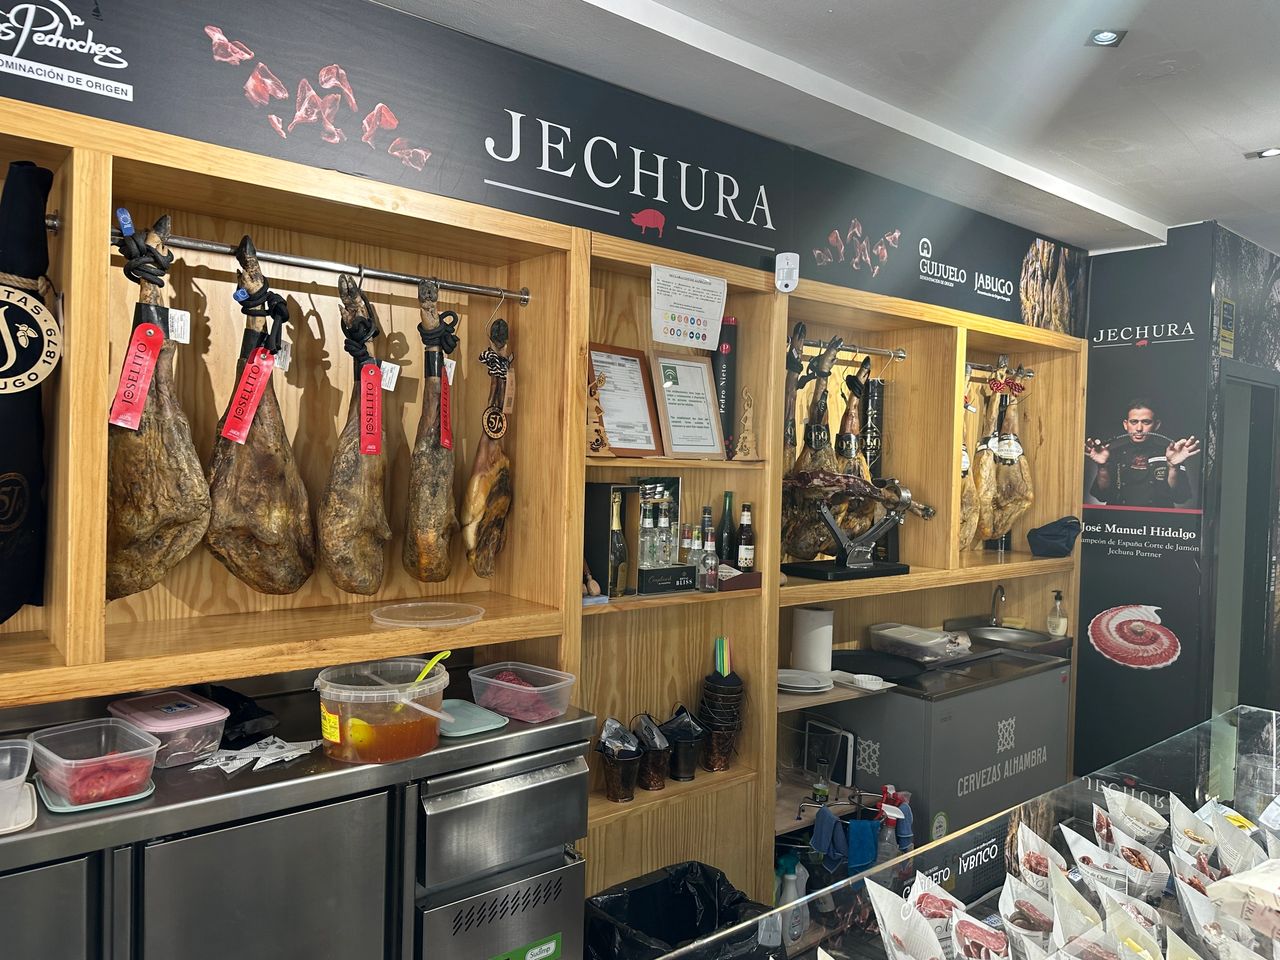 Jamon (ham) is everywhere in Andalucia!